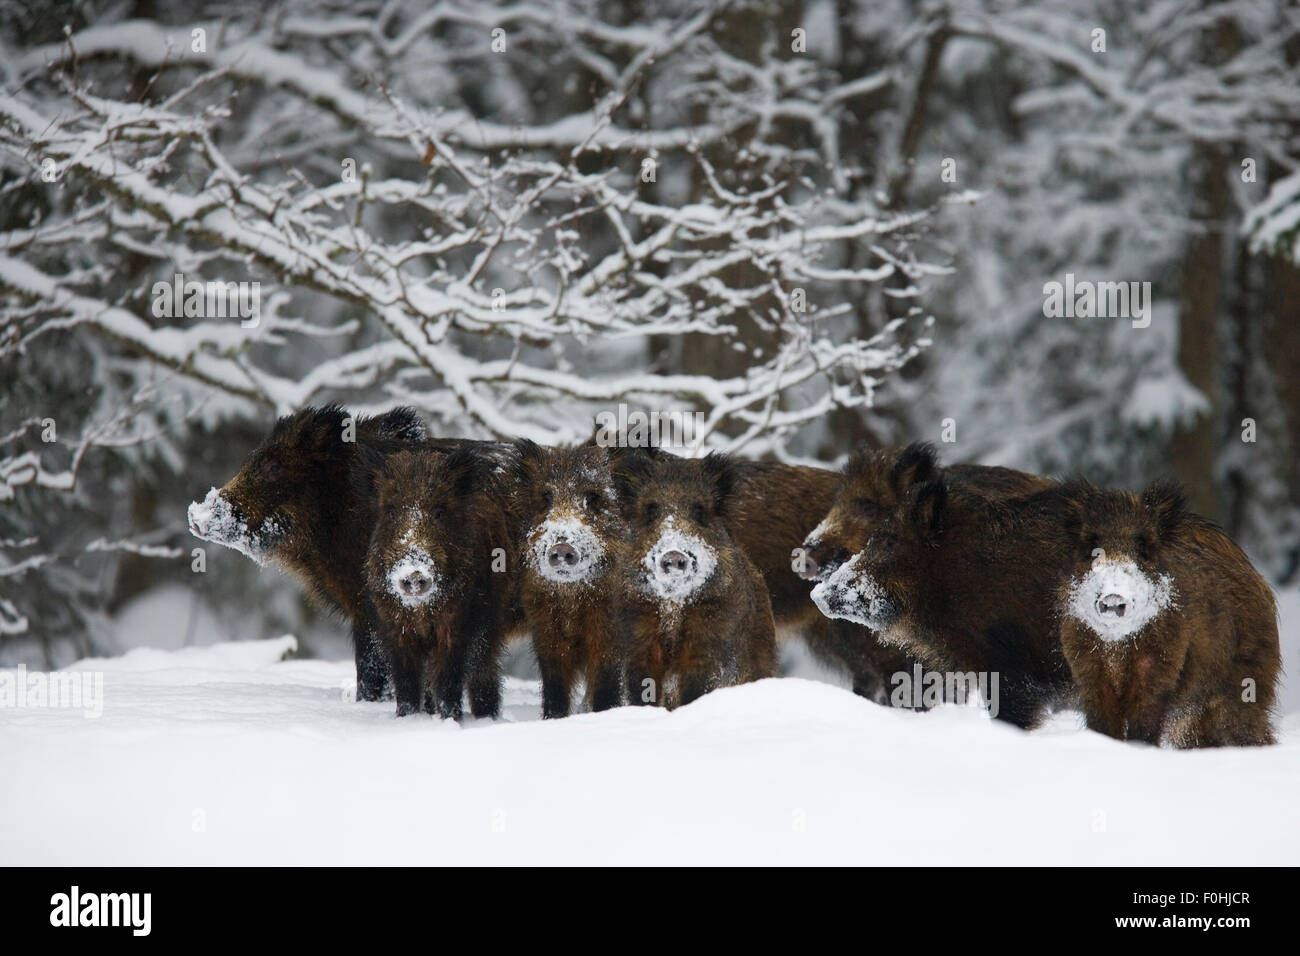 Wild boar (Sus scrofa) herd with snow covered noses from feeding, Alam-Pedja Nature reserve, Estonia, February 2006 Stock Photo